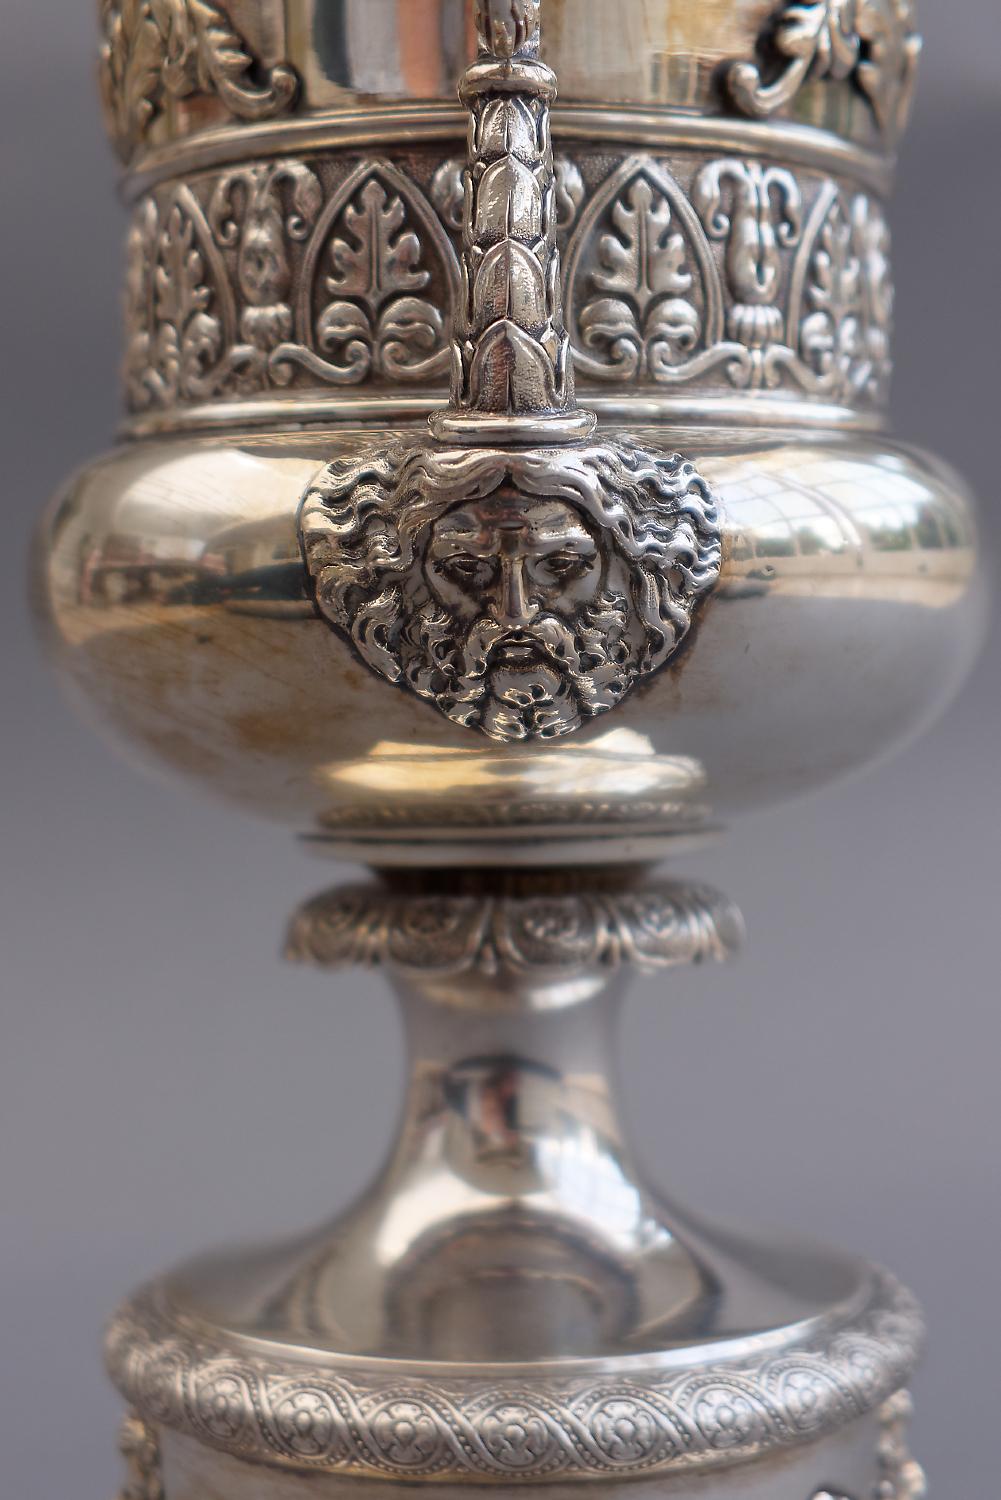 Early 19th Century Italian Neoclassical Silver Urn Vase Milan by Emanuele Caber For Sale 3